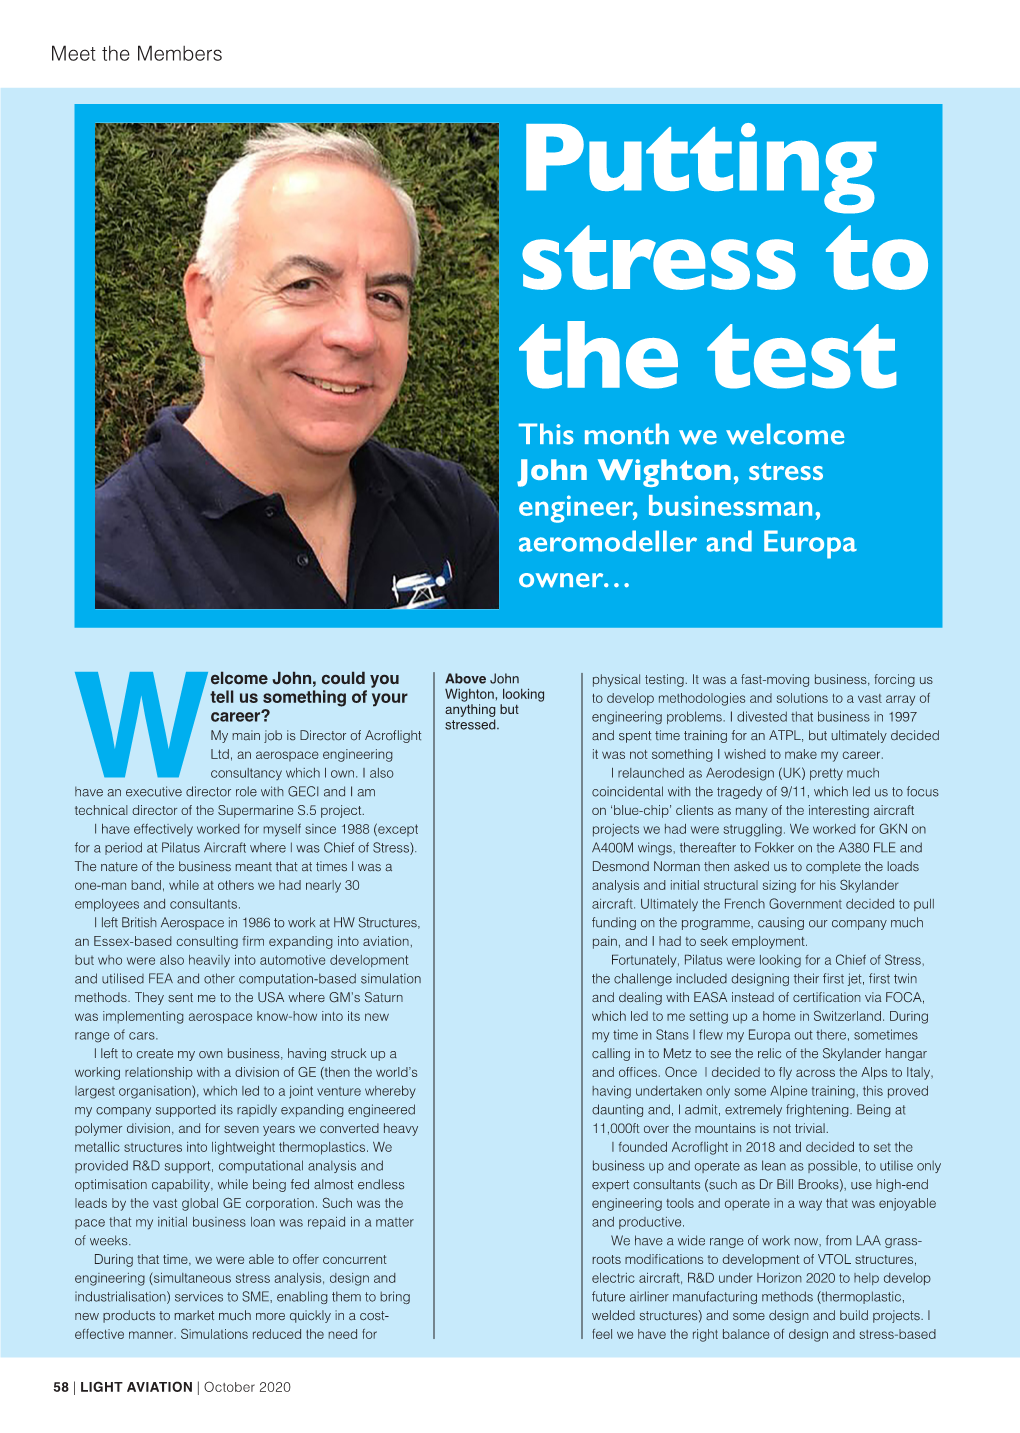 Putting Stress to the Test This Month We Welcome John Wighton, Stress Engineer, Businessman, Aeromodeller and Europa Owner…